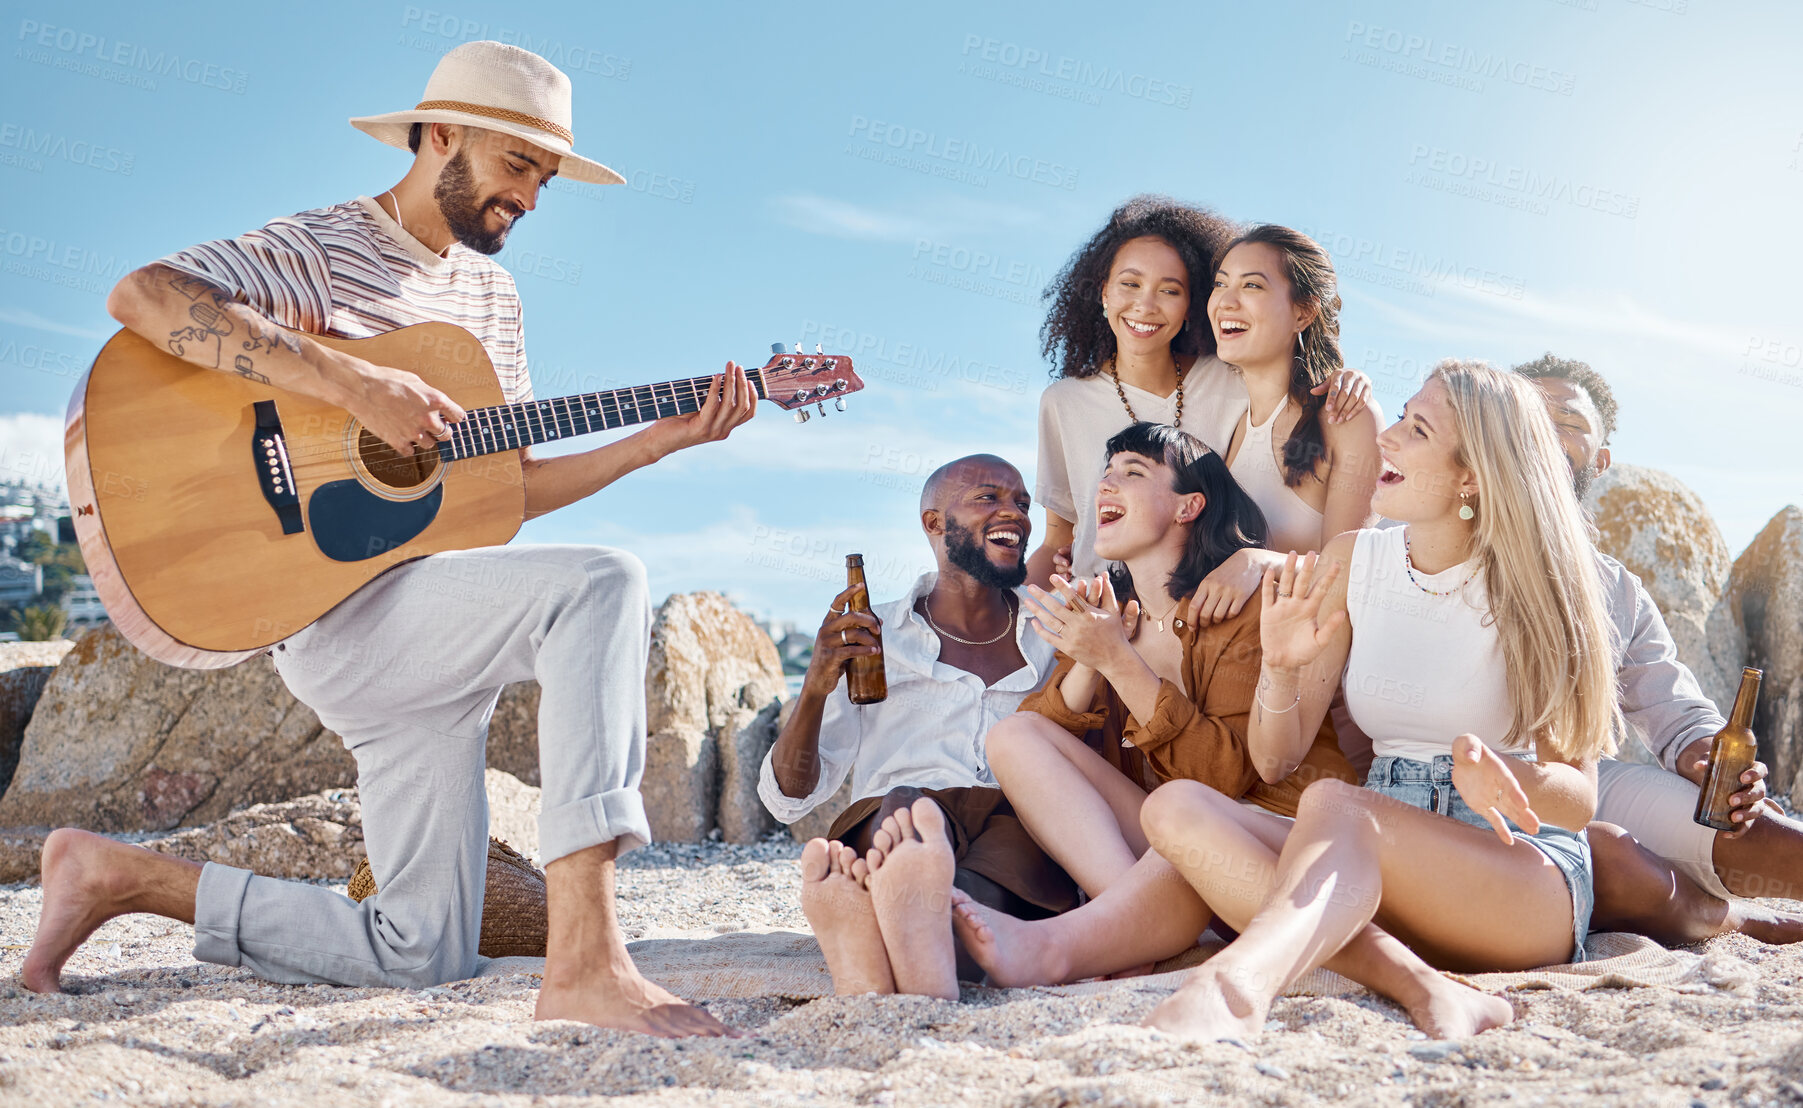 Buy stock photo Shot of a man playing the guitar while his friends sing along at the beach